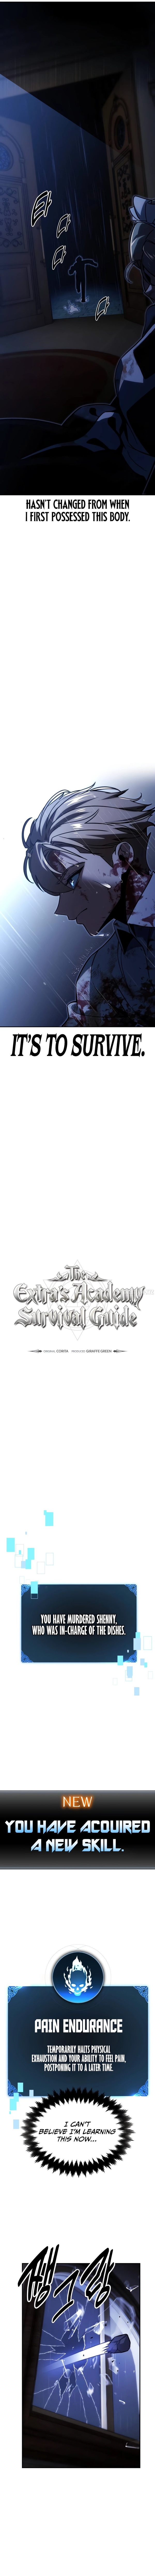 the-extras-academy-survival-guide-chap-20-11